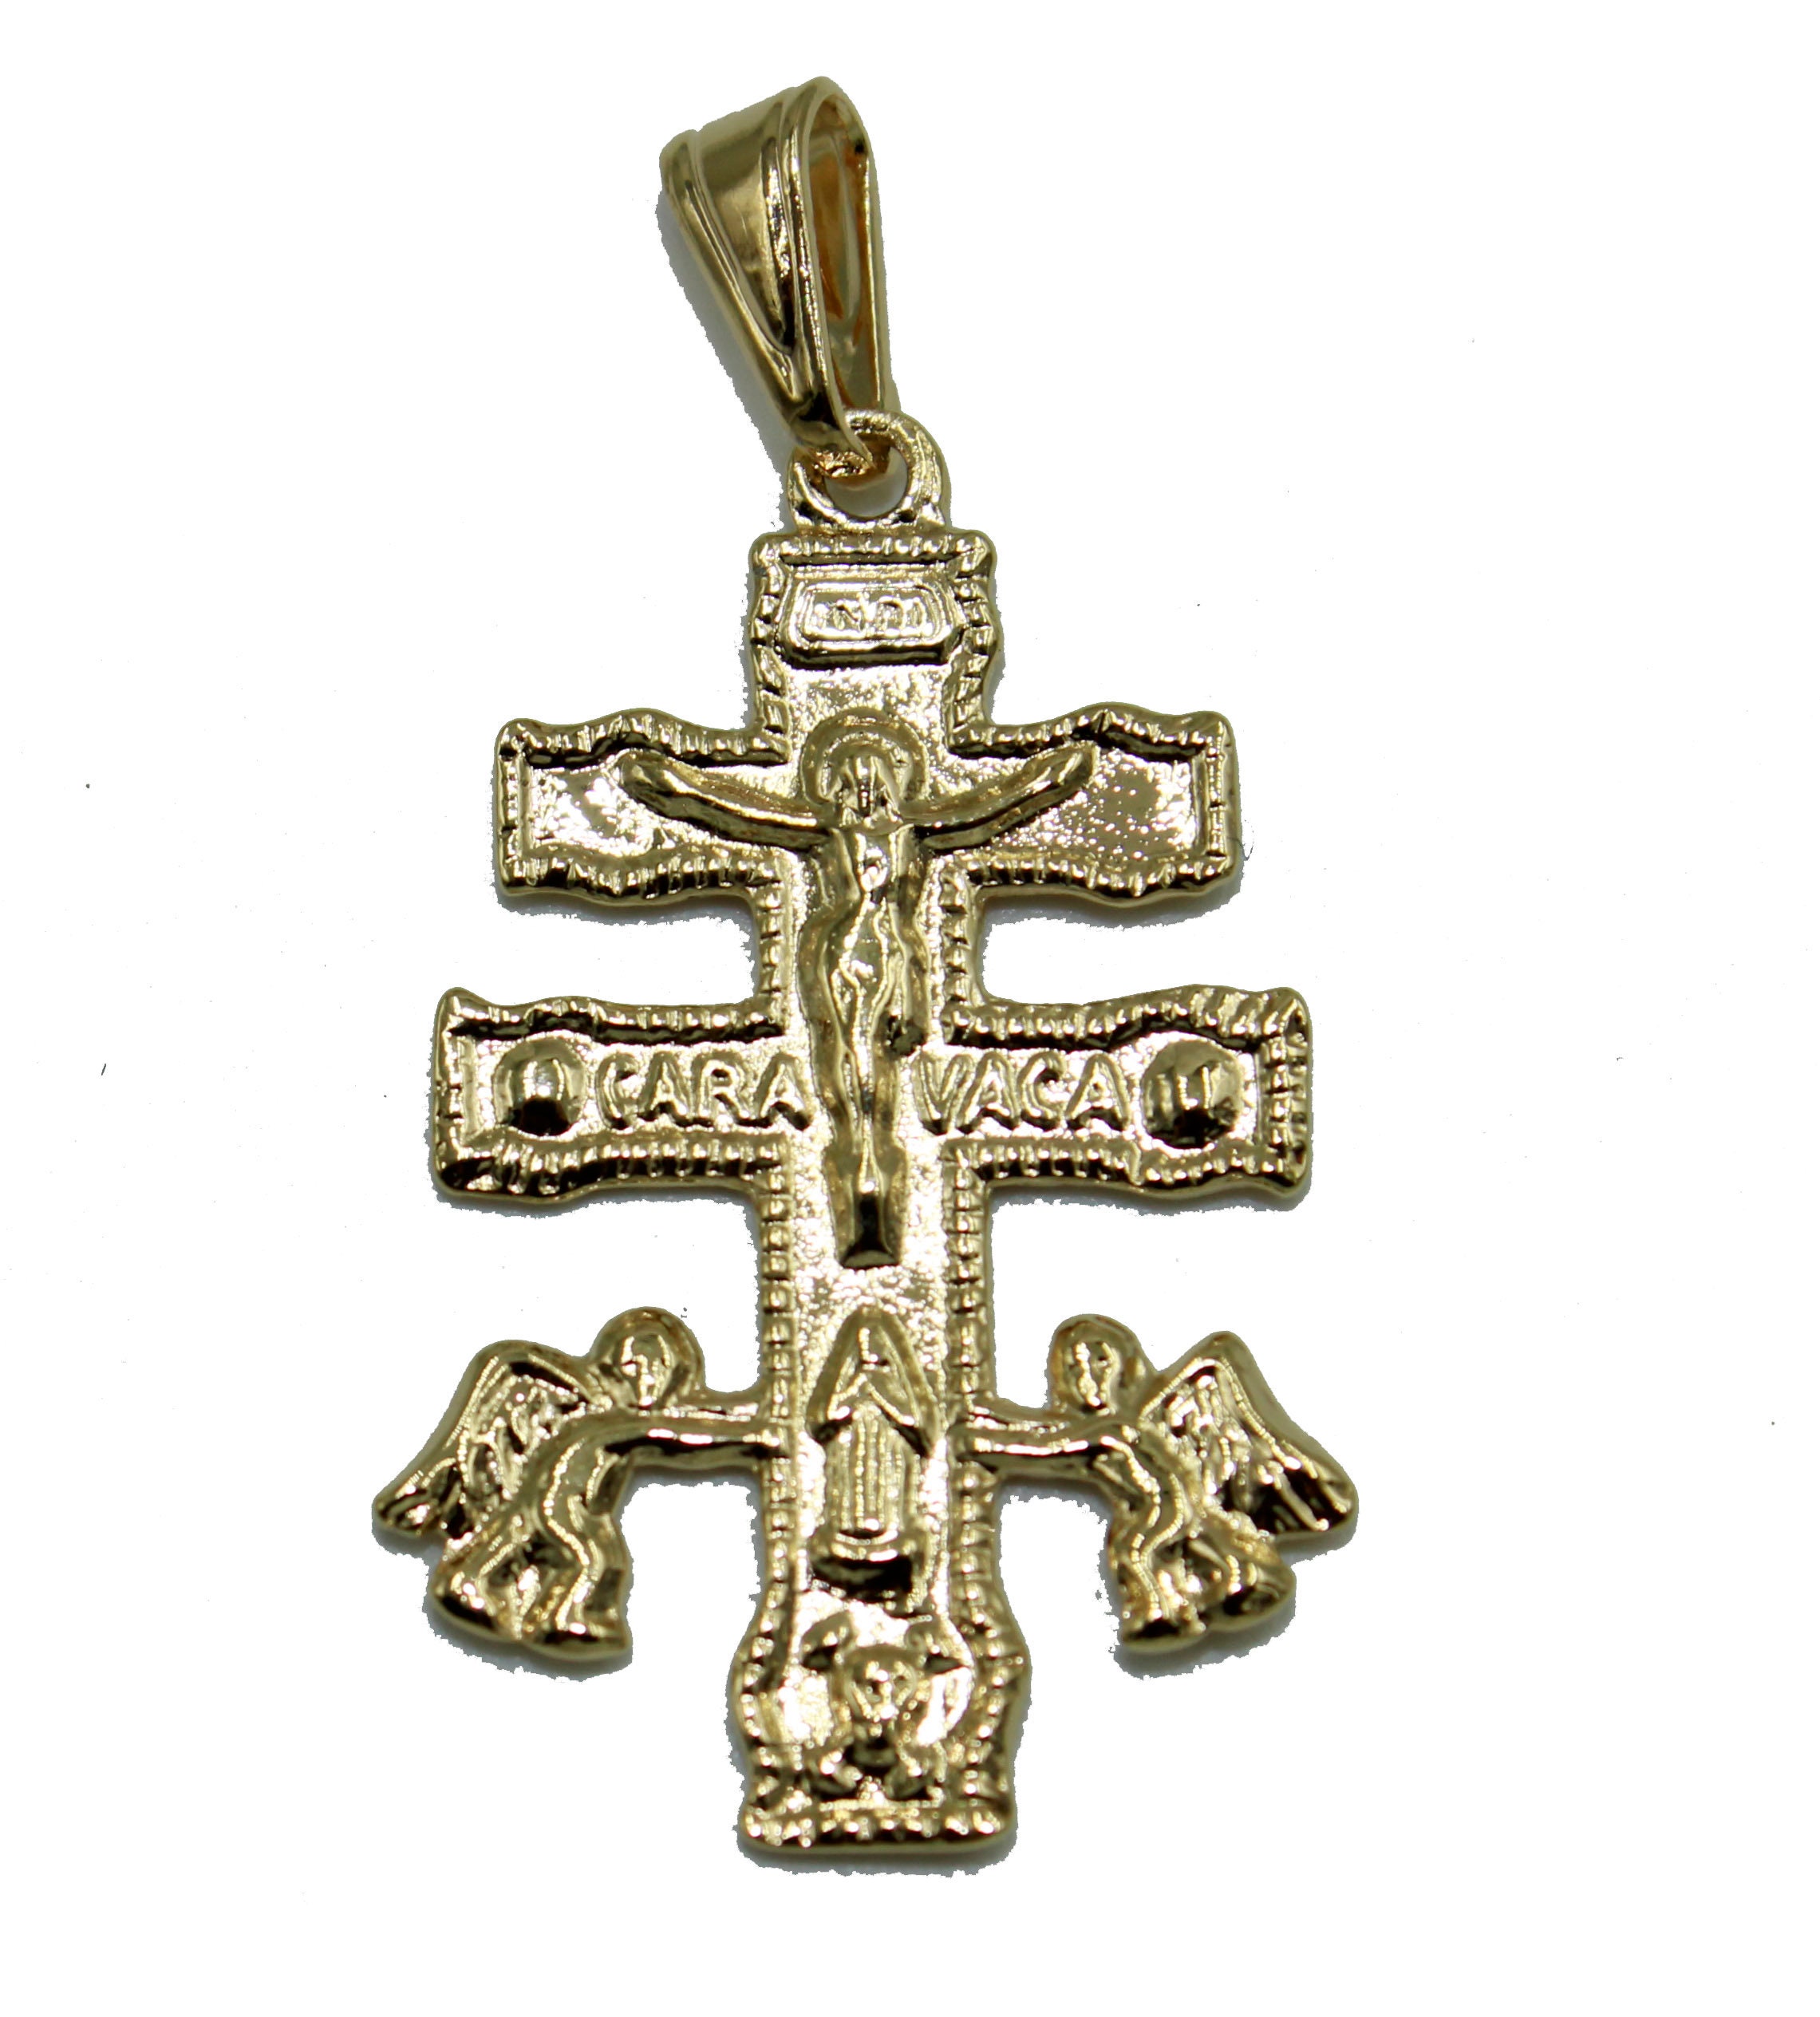 Caravaca Necklace Caravaca Cross Pendant 18k Gold Plated with 20 inch  Chain 